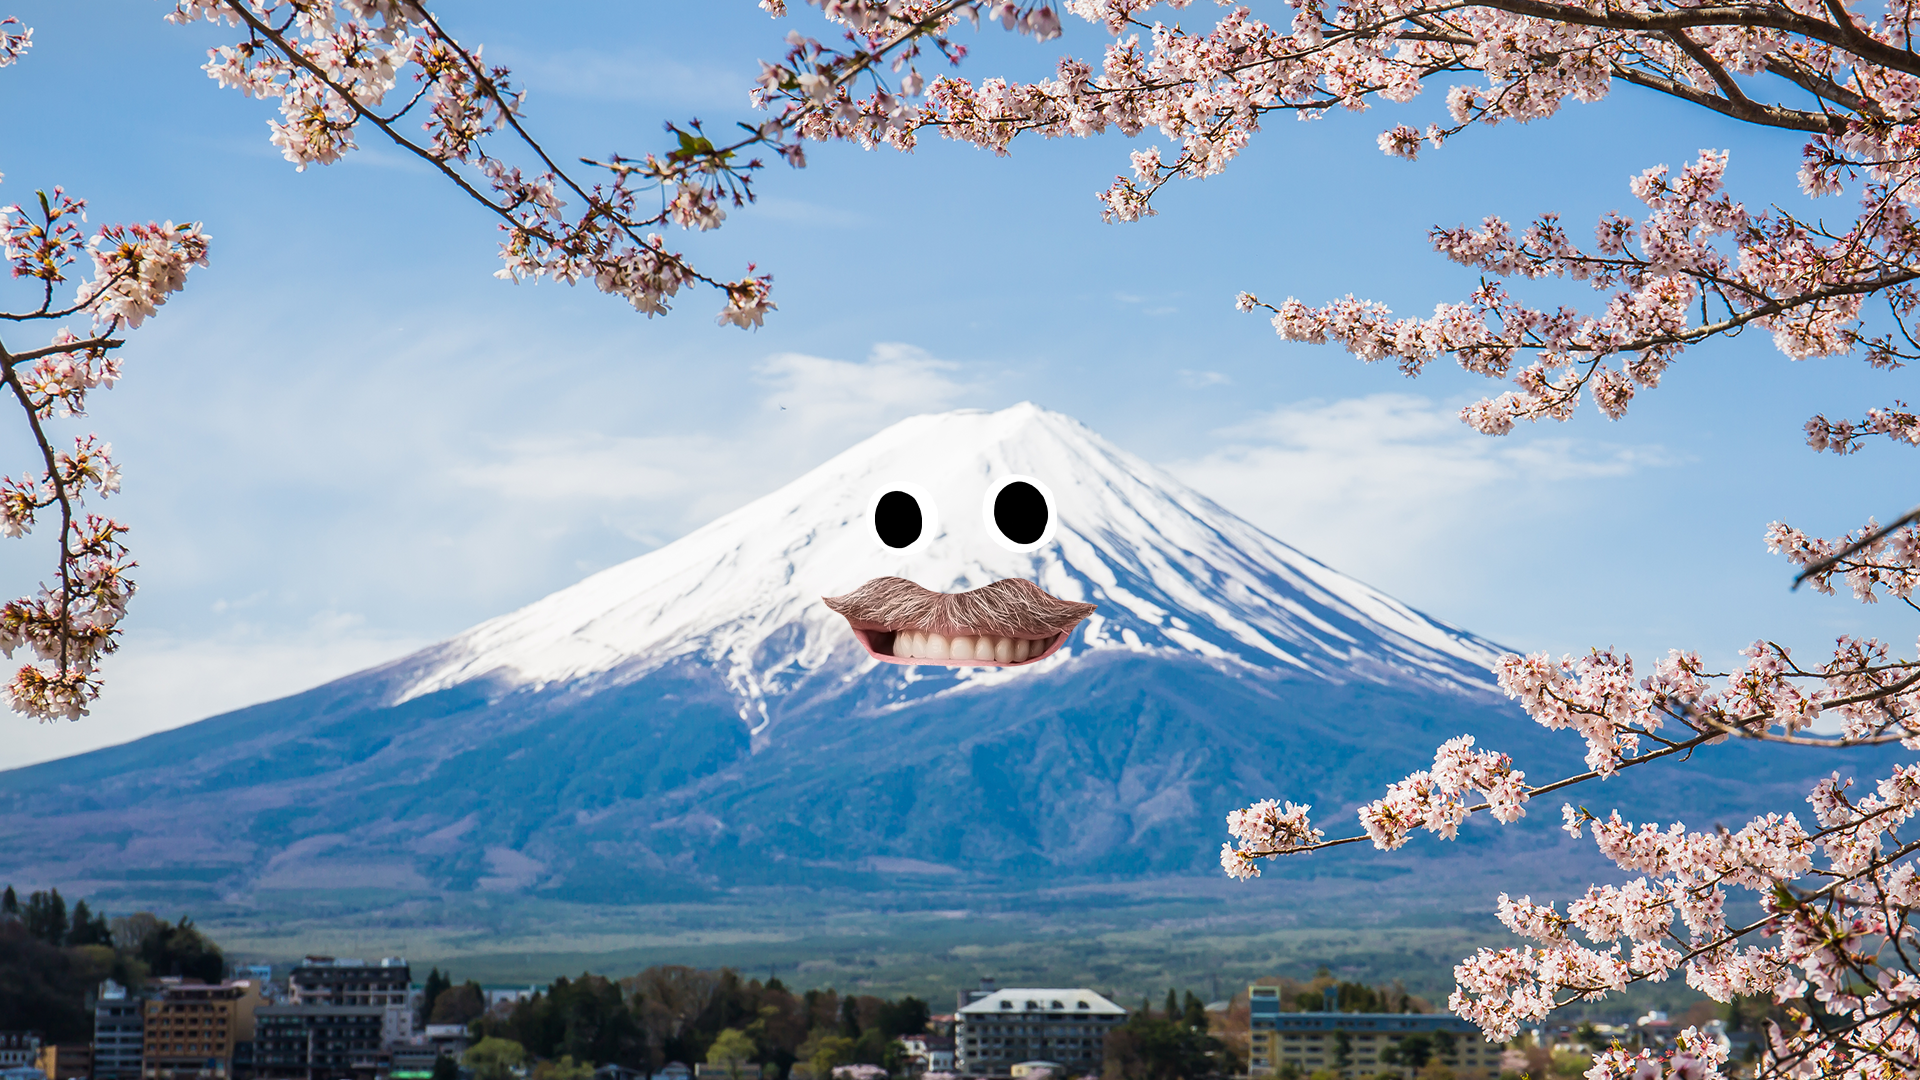 Mount Fuji with goofy face